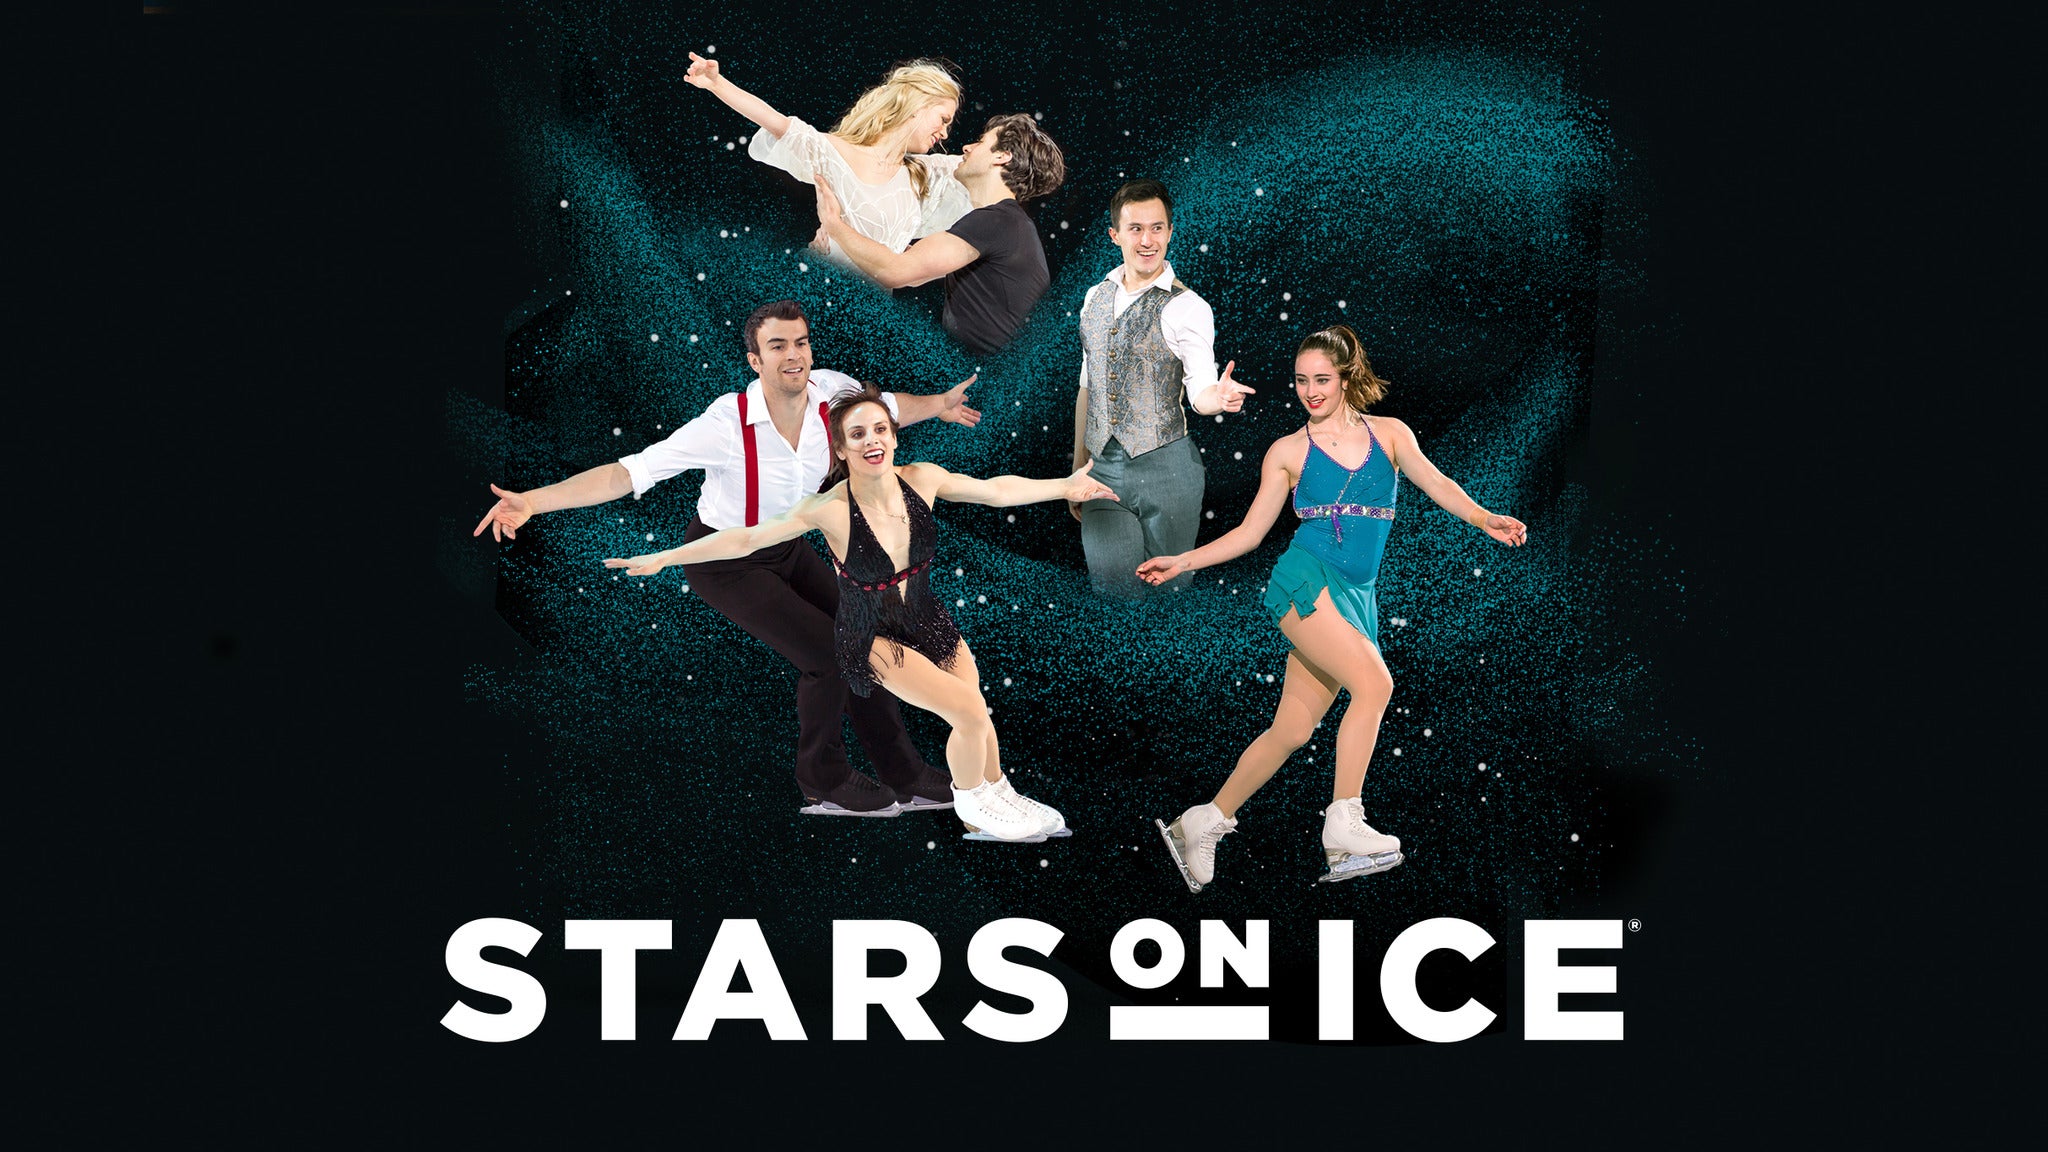 Stars on Ice - Canada in Toronto event information